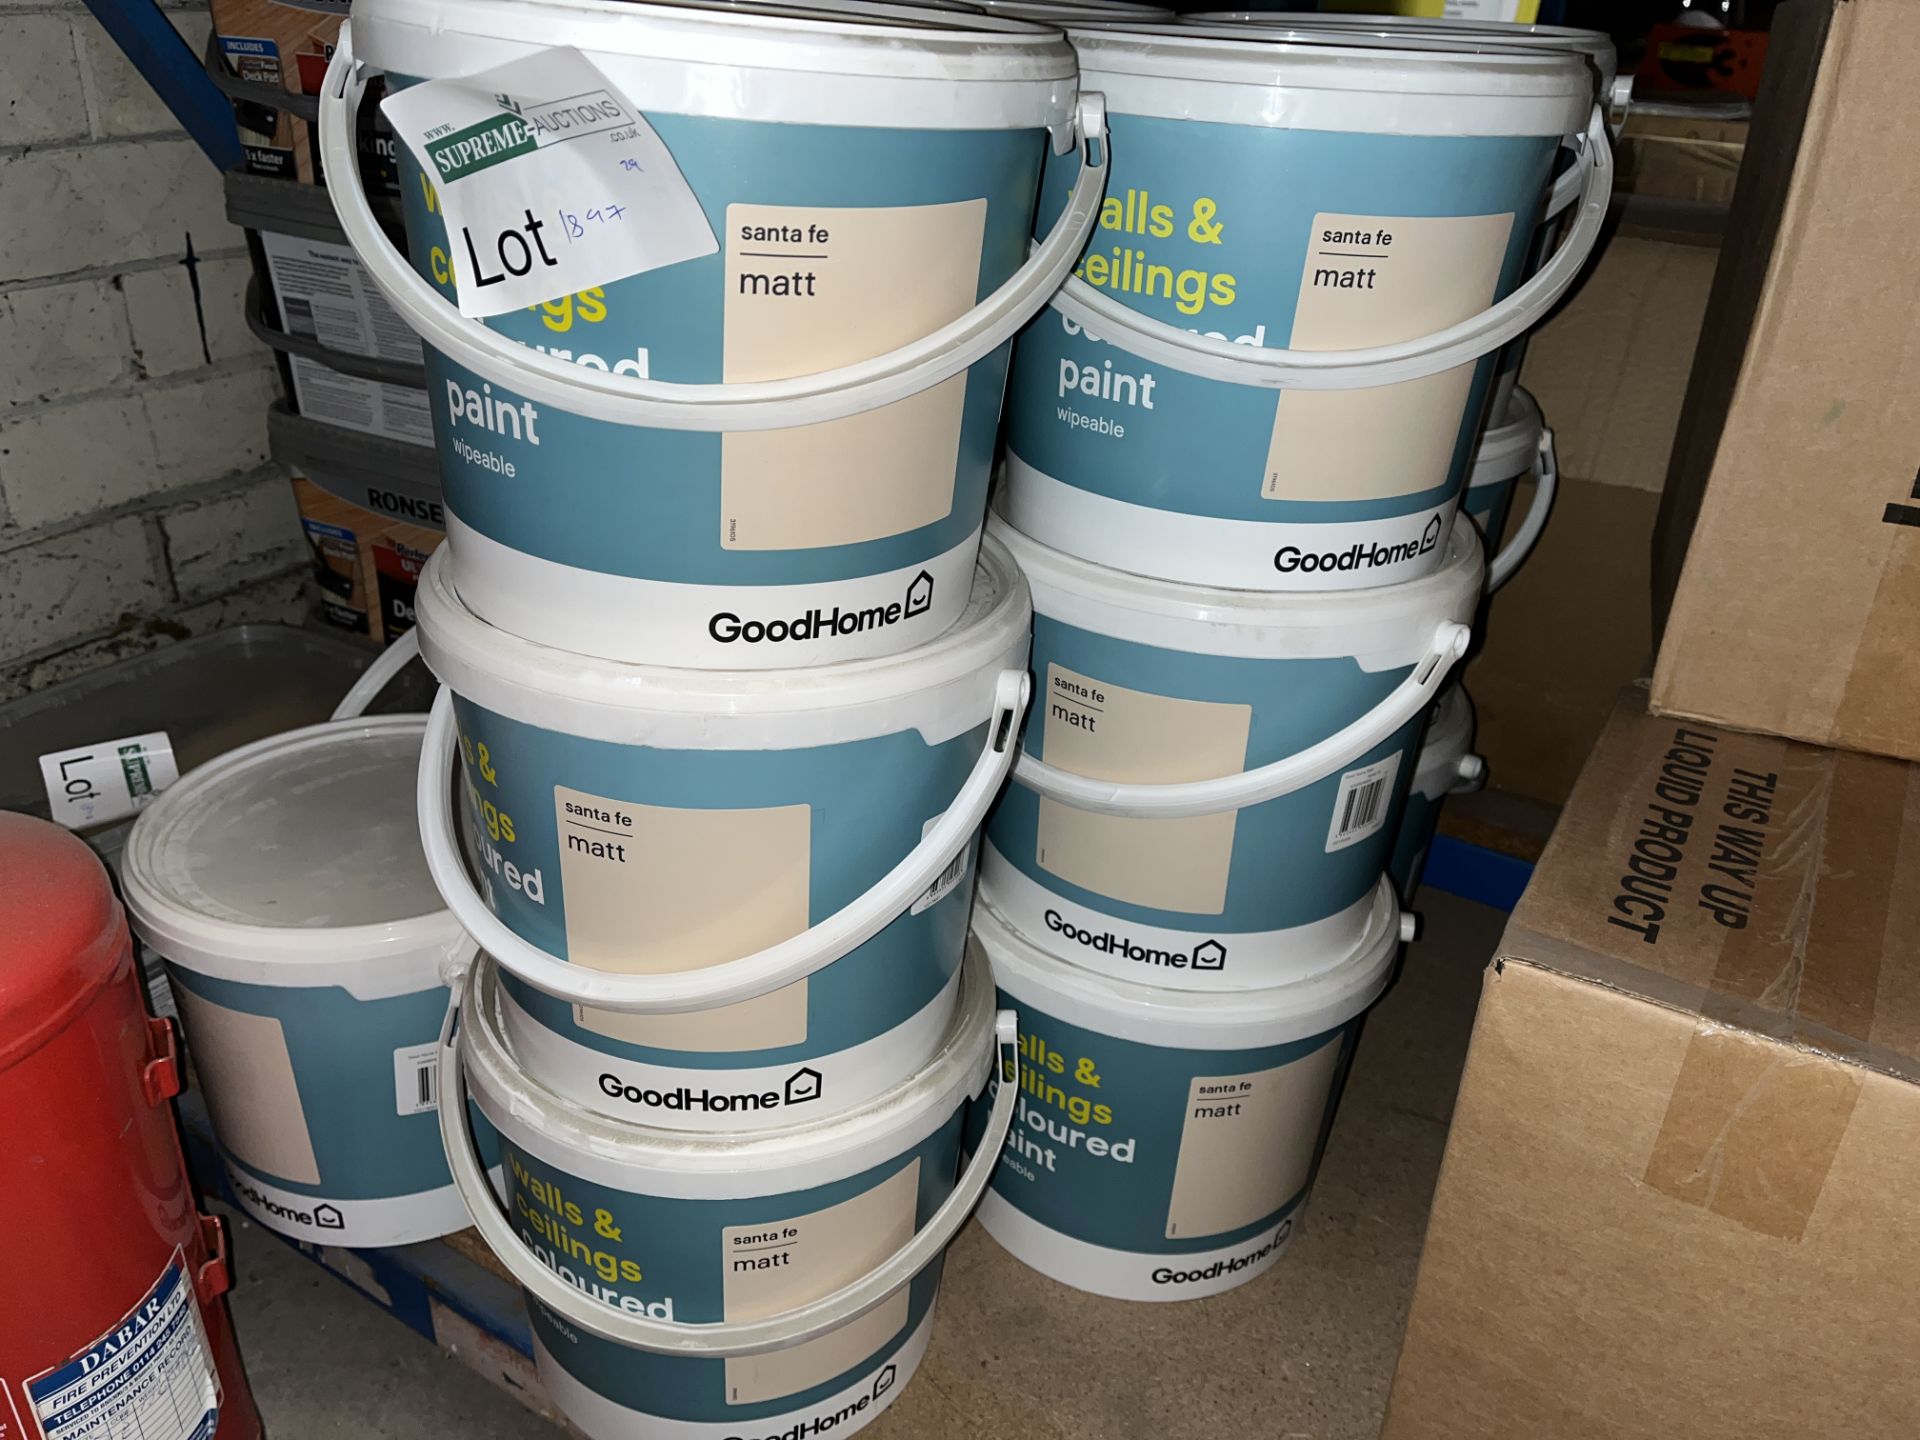 16 X BRAND NEW GOODHOME SANTE FE WALLS AND CEILINGS PAINT 2.5L S1-30